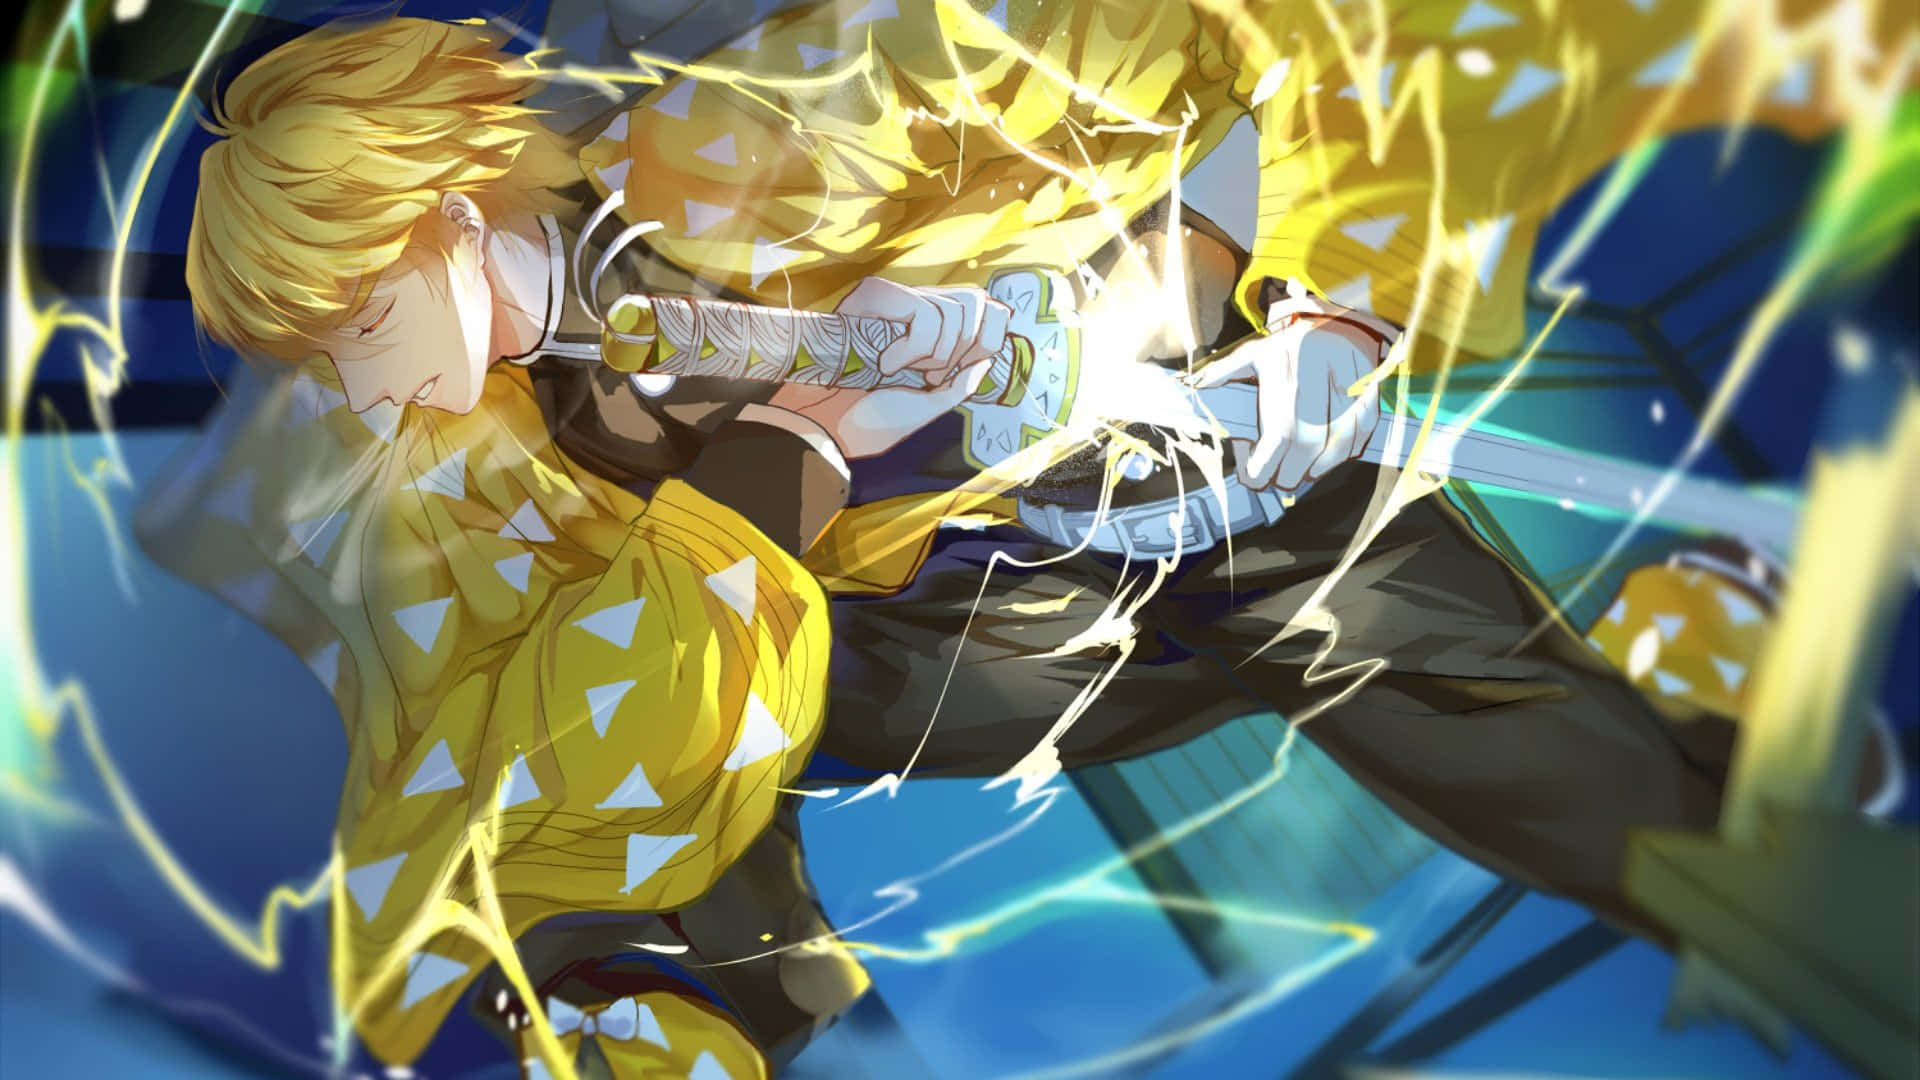 Anime Boy With Mask  yellow hoddie Wallpaper Download  MobCup